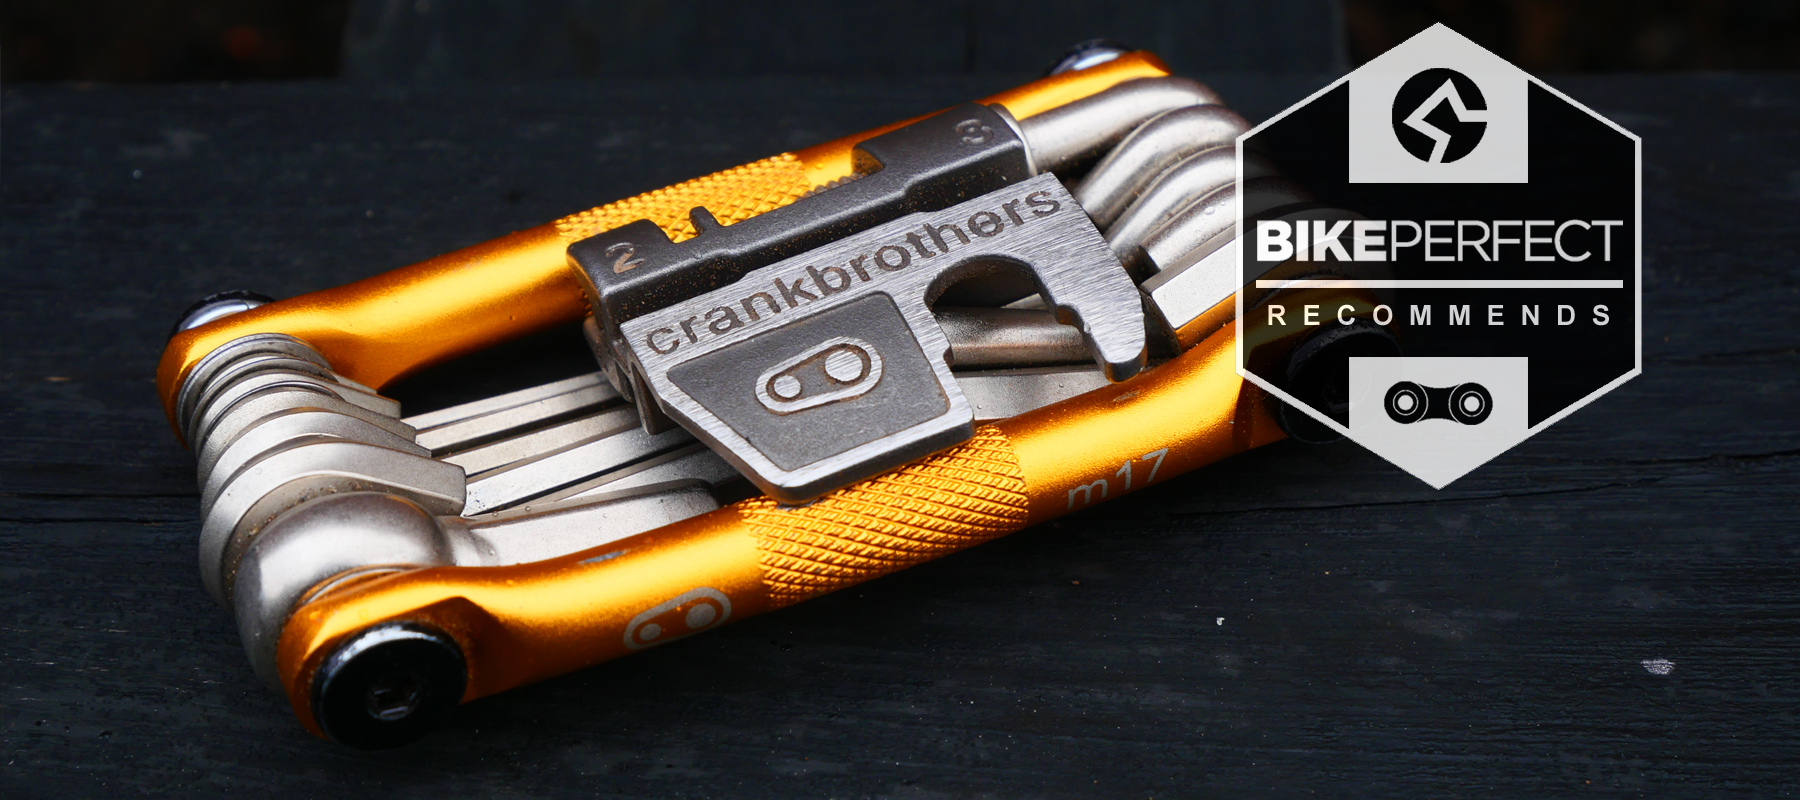 Review: Crankbrothers m17 Multi Tool - BikeMag